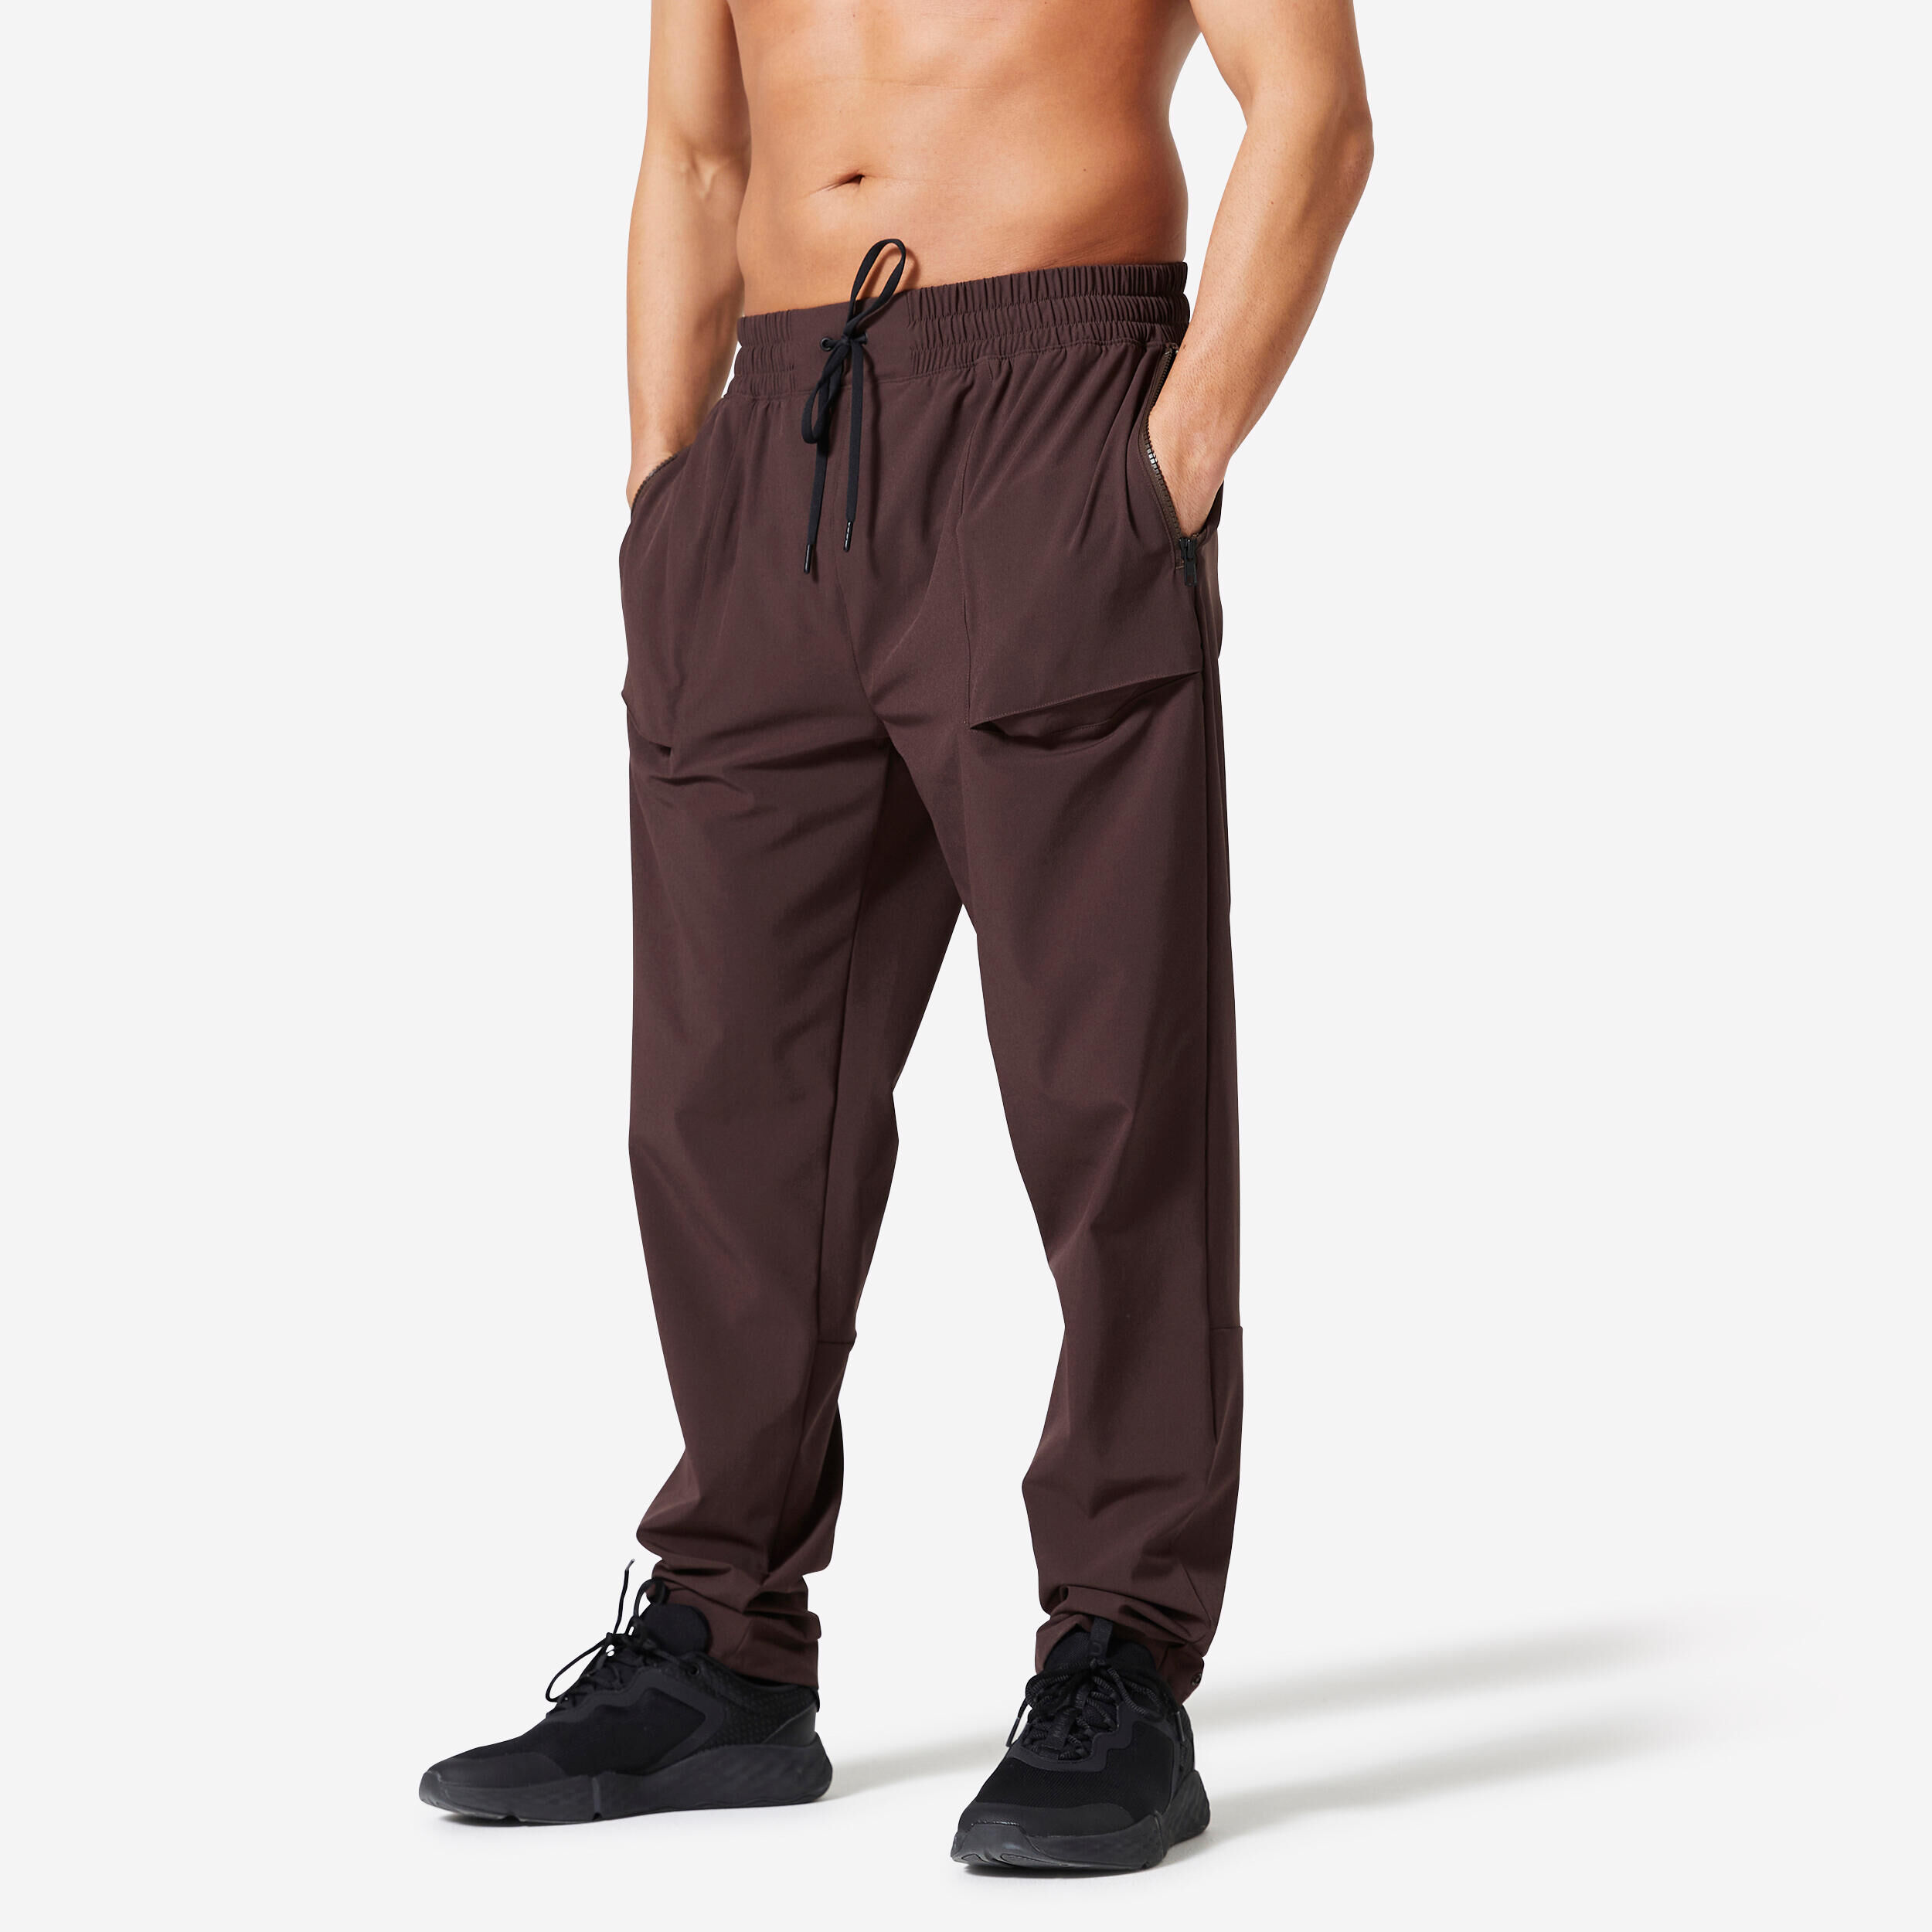 DOMYOS Men's Breathable Fitness Collection Bottoms - Brown